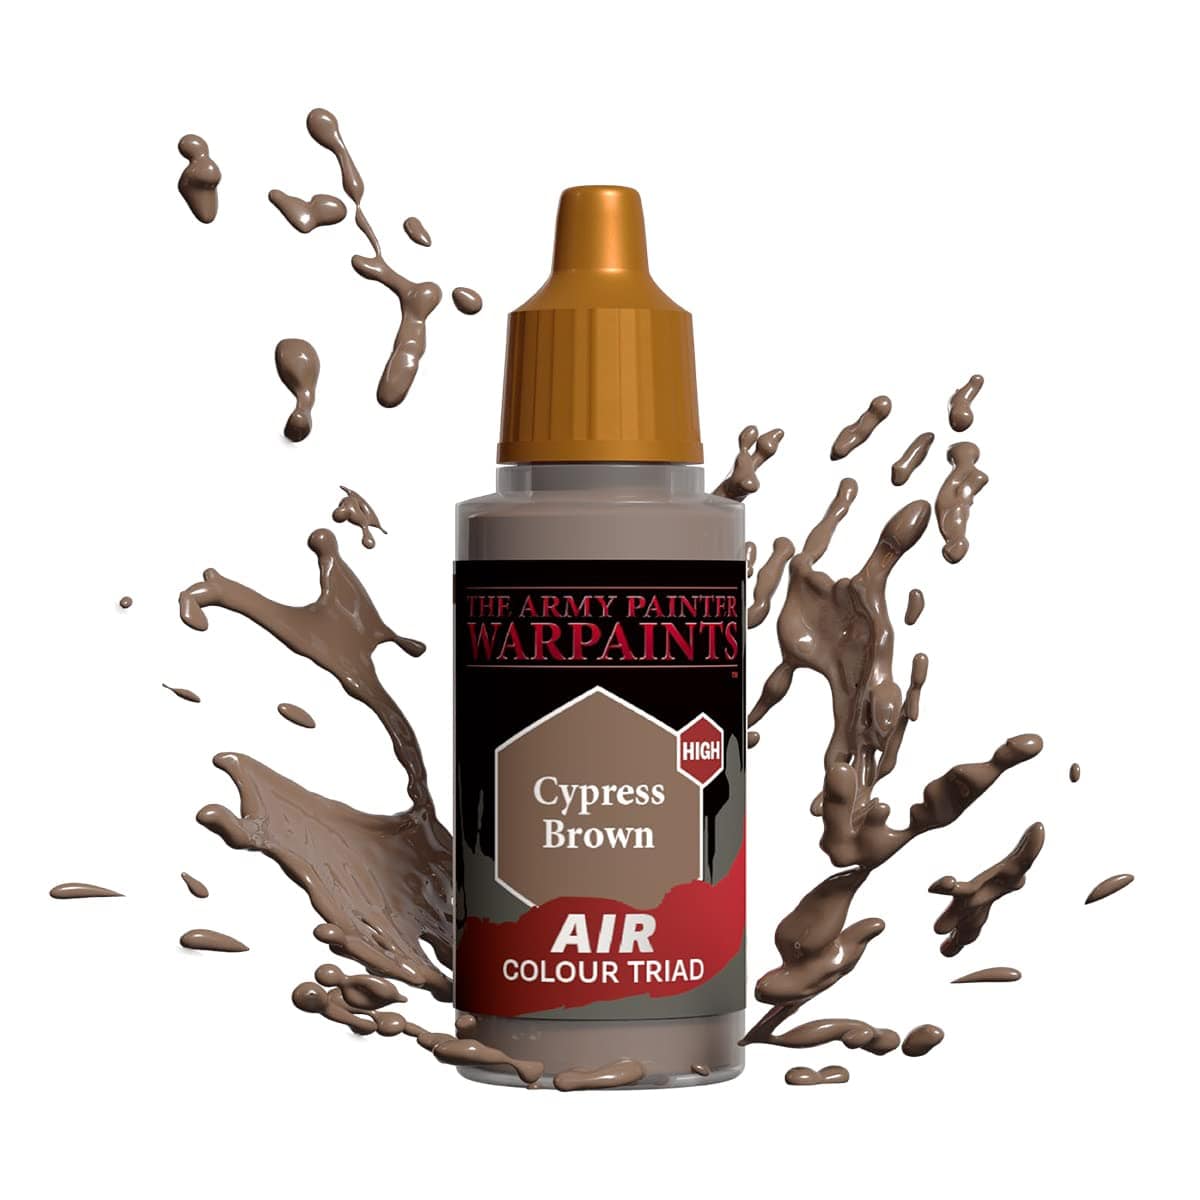 The Army Painter Accessories The Army Painter Warpaints Air: Cypress Brown 18ml